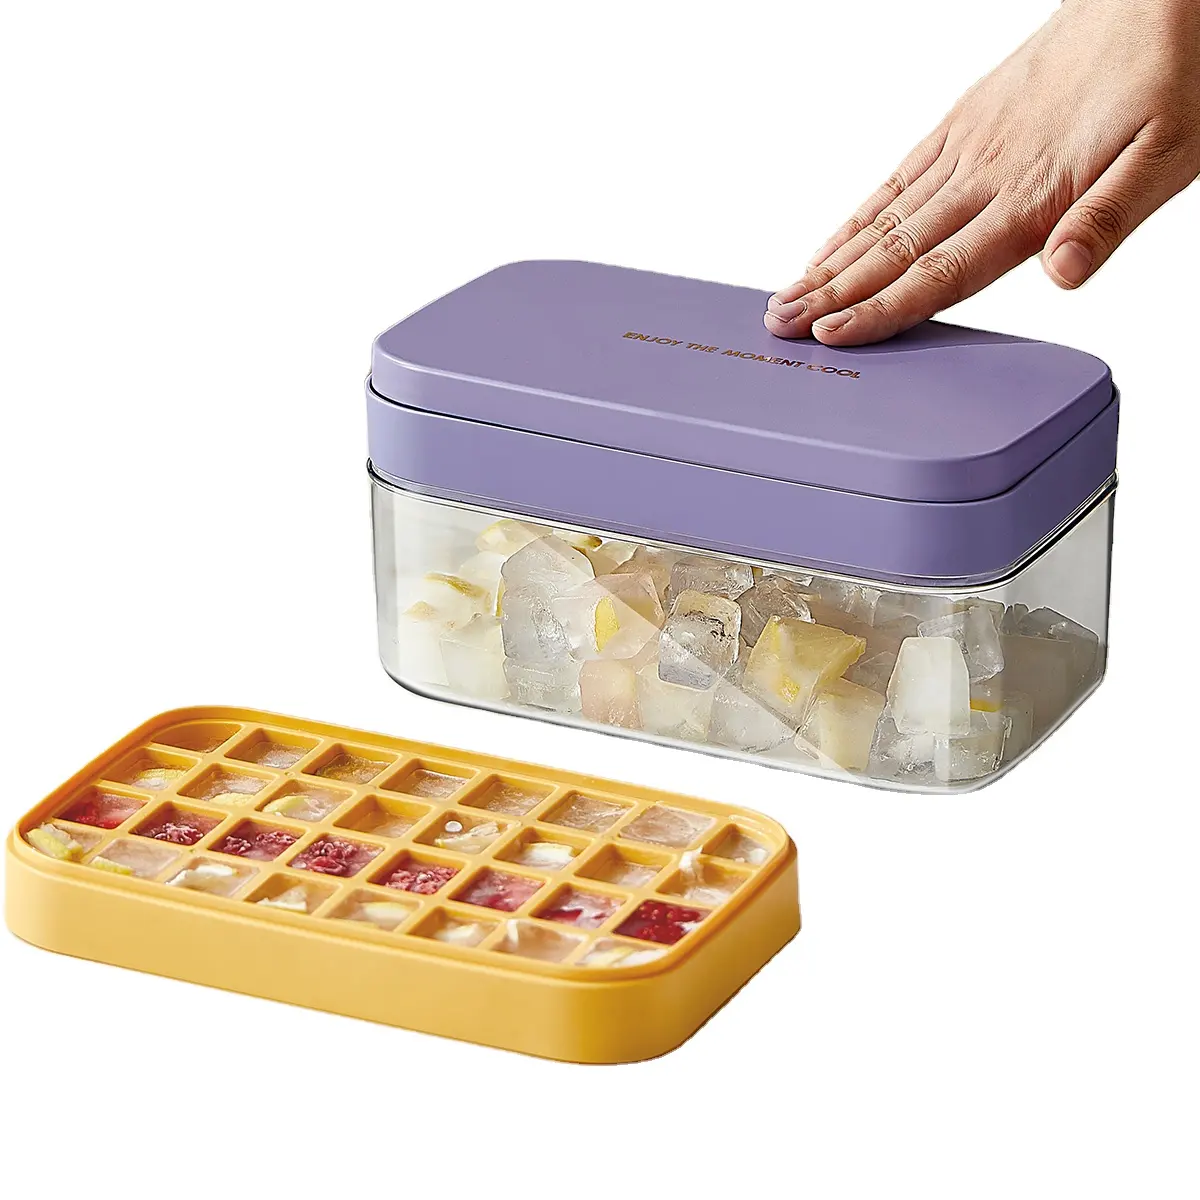 Portable Ice box Maker Mold Cells Kitchen And Home ice cube tray with lid ice Cube Tray Mold Leakproof